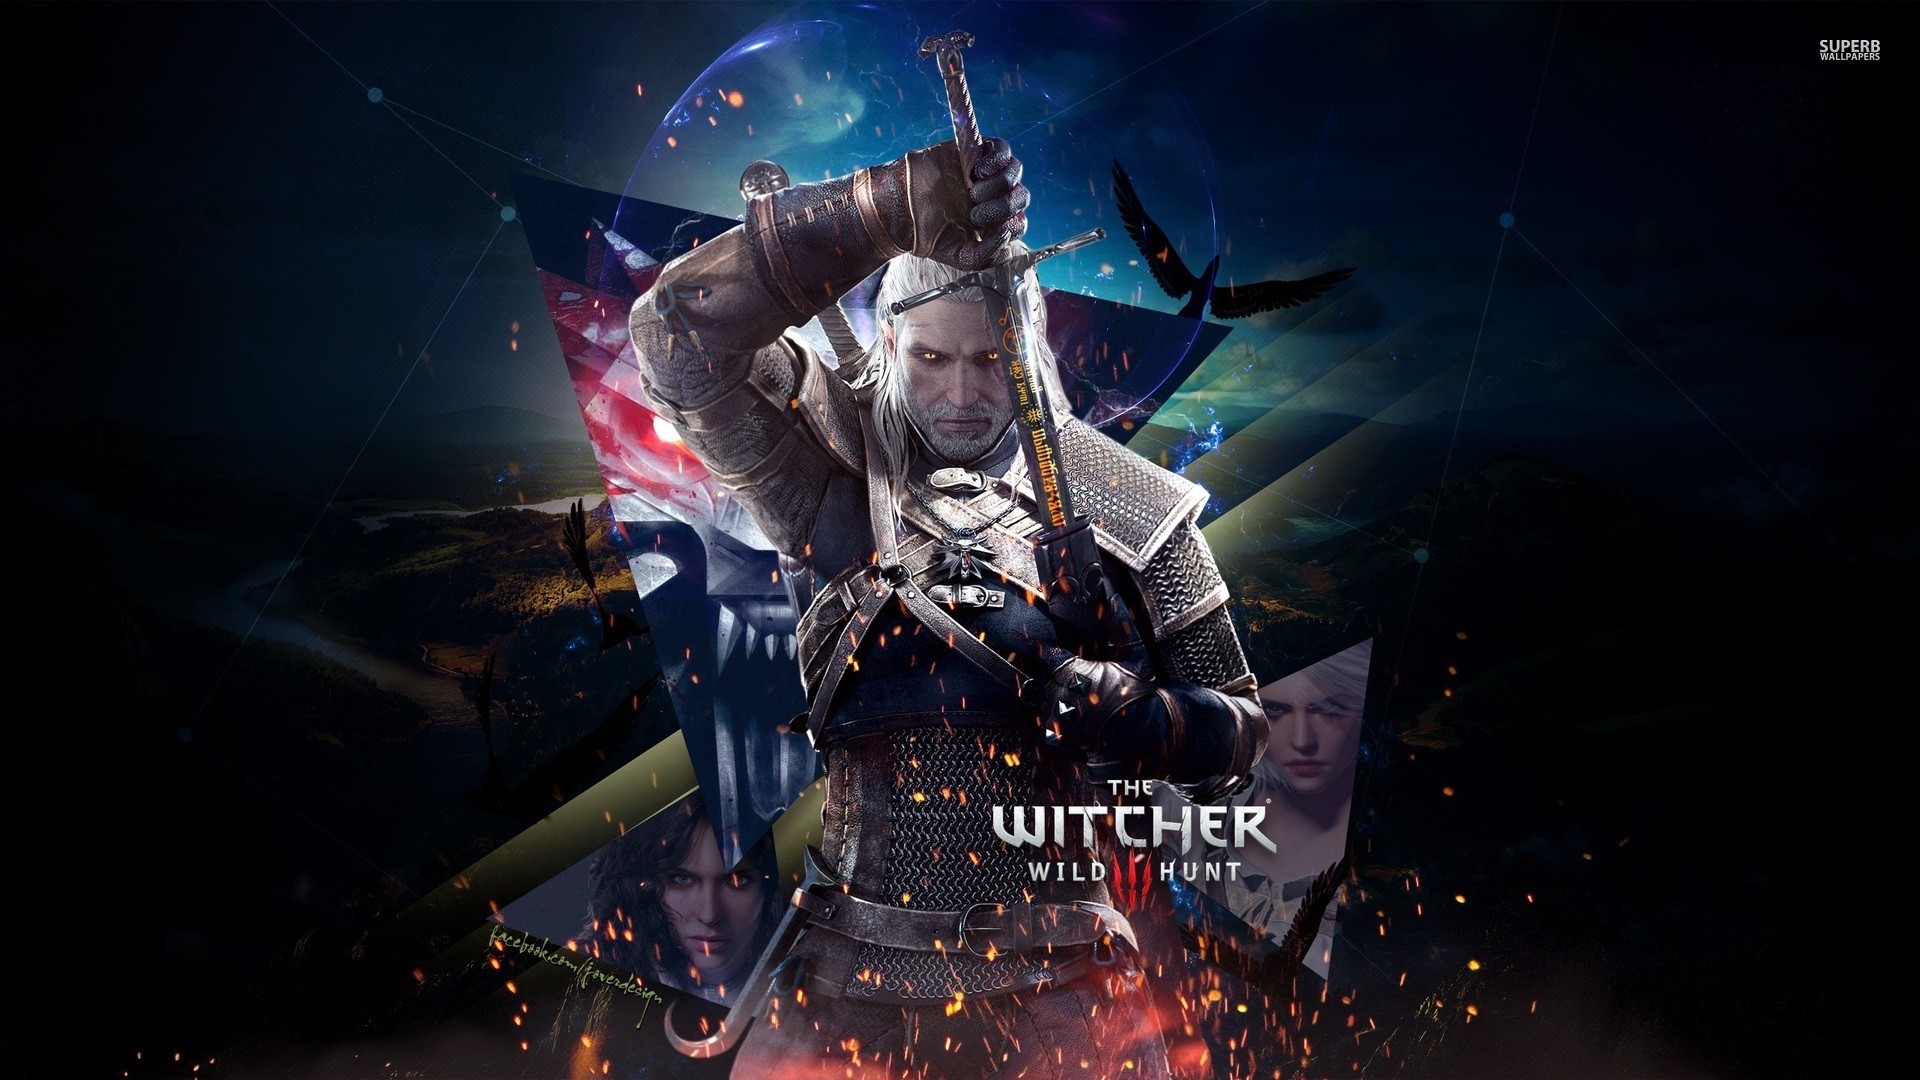 The Witcher Wallpaper ·① Download Free Stunning High Resolution